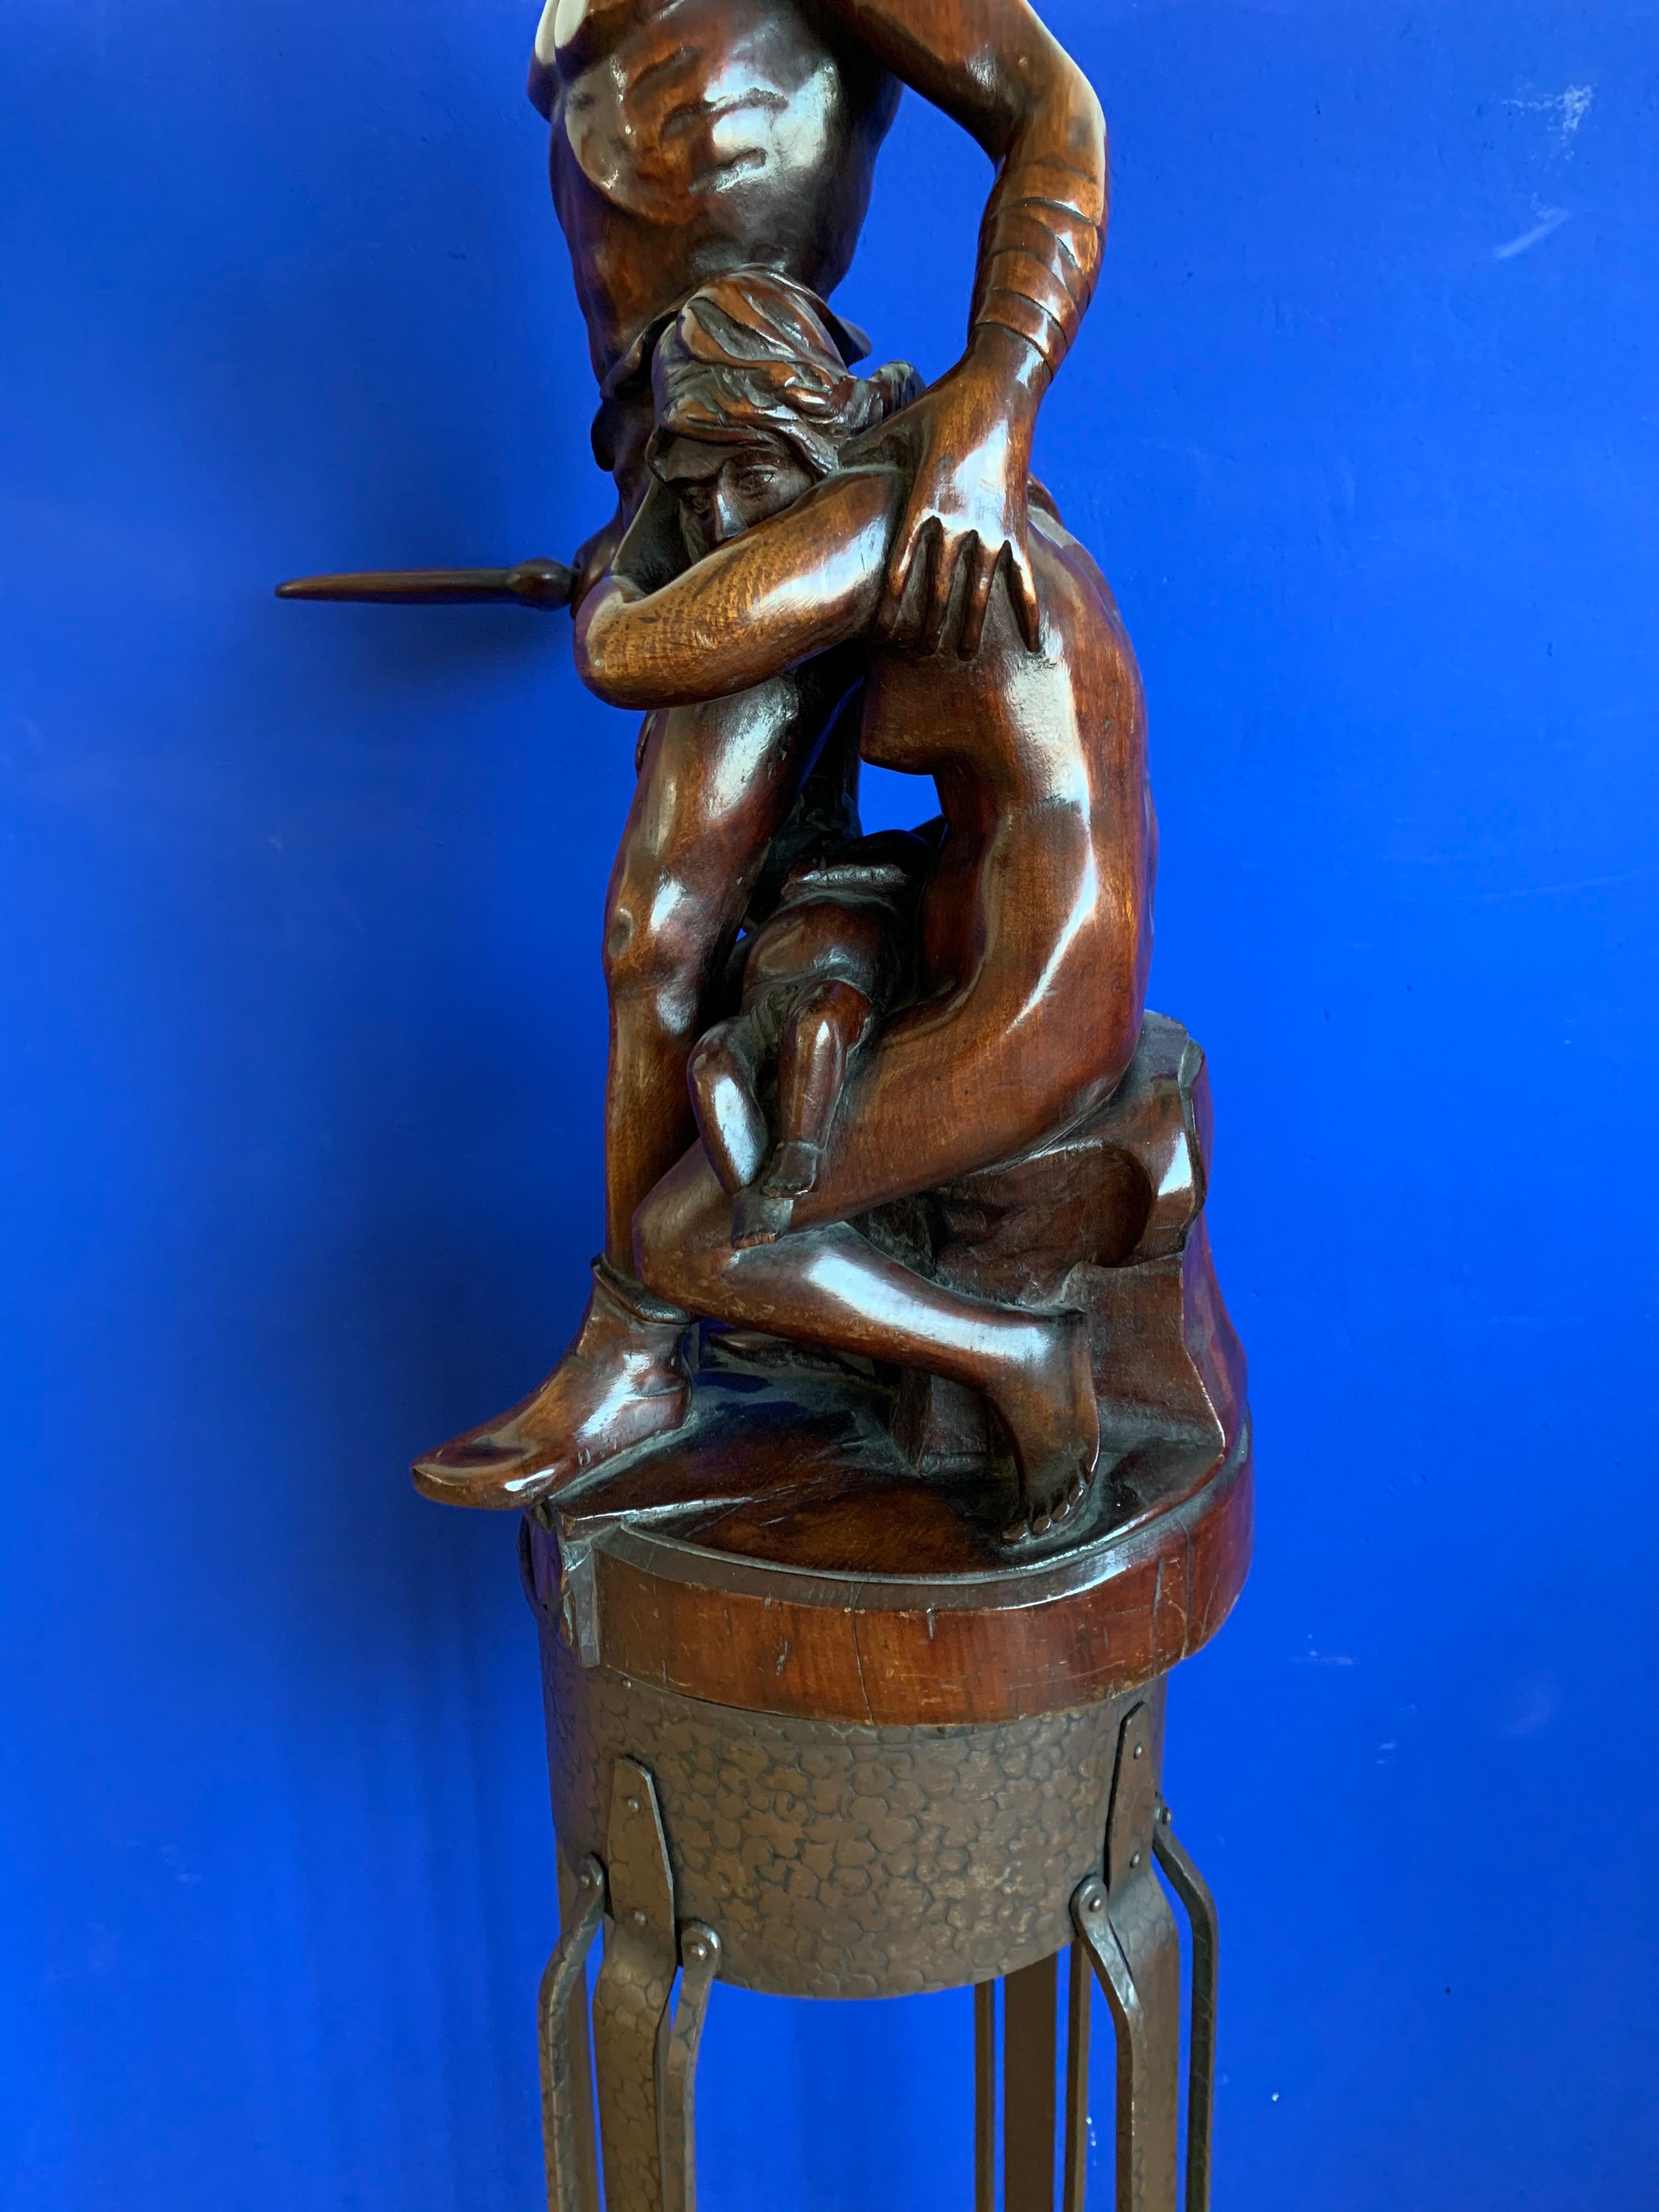 19th Century One of a Kind Antique Carved Wood Group Statue Sculpture by Emile Boisseau For Sale